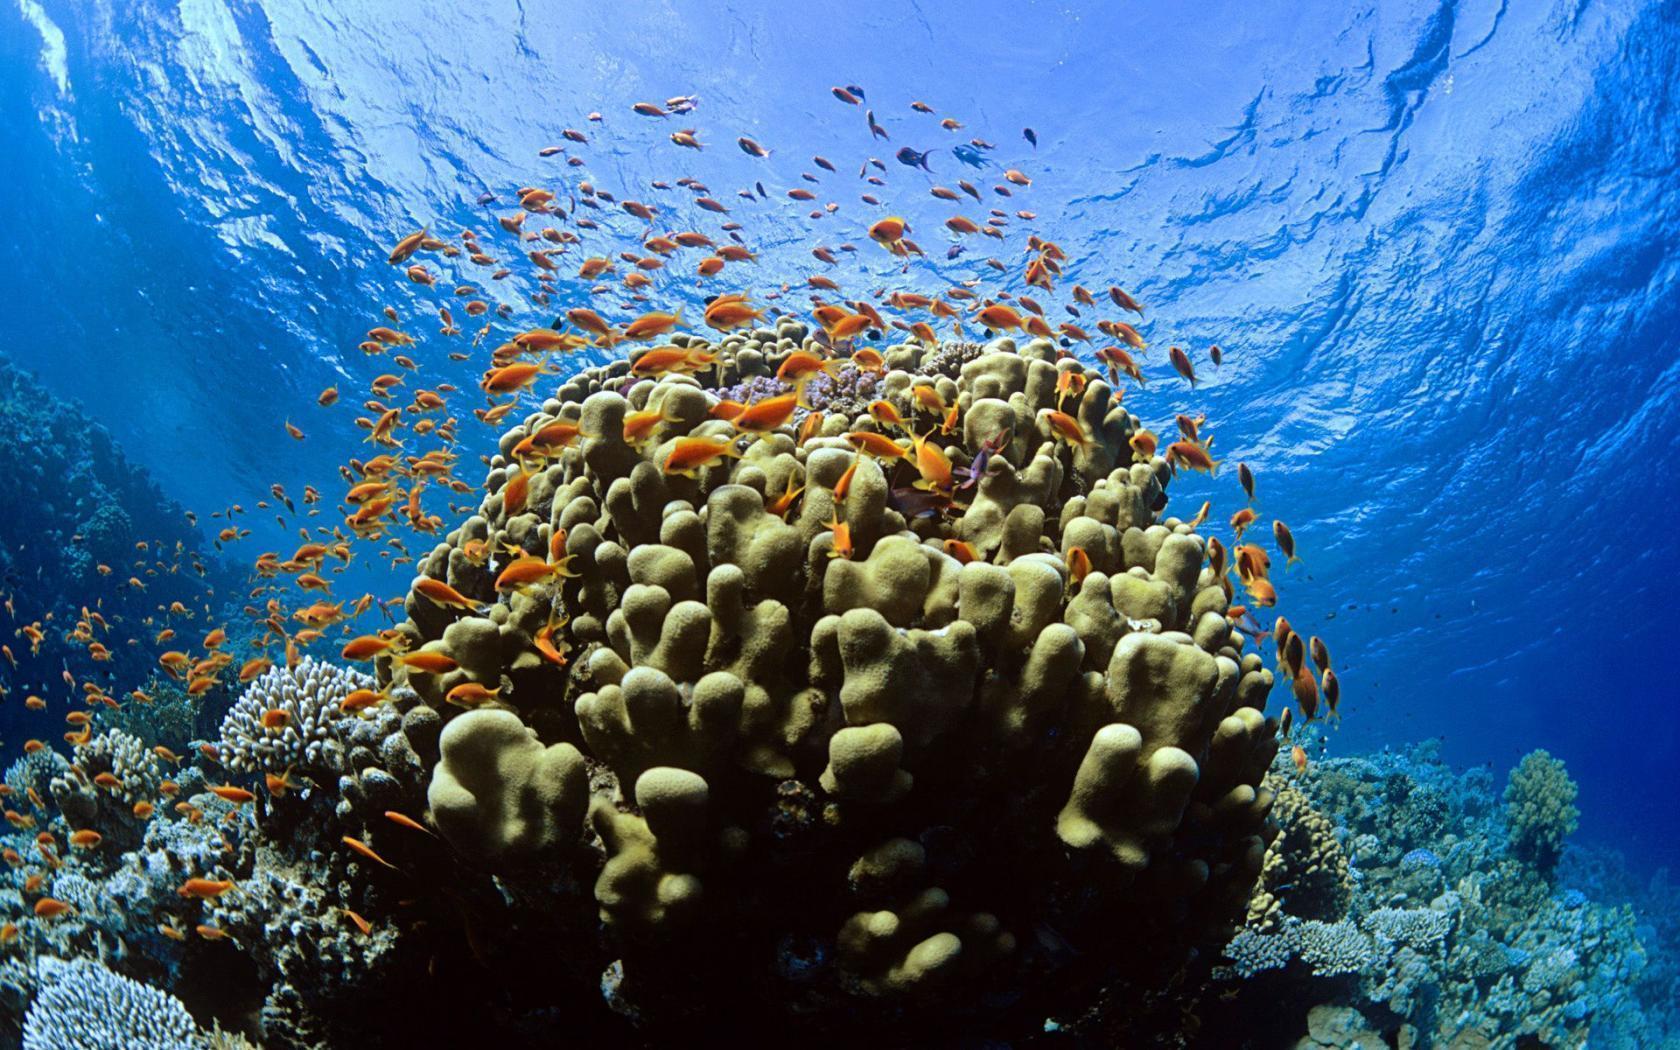 Wallpapers » Coral Reefs Wallpapers